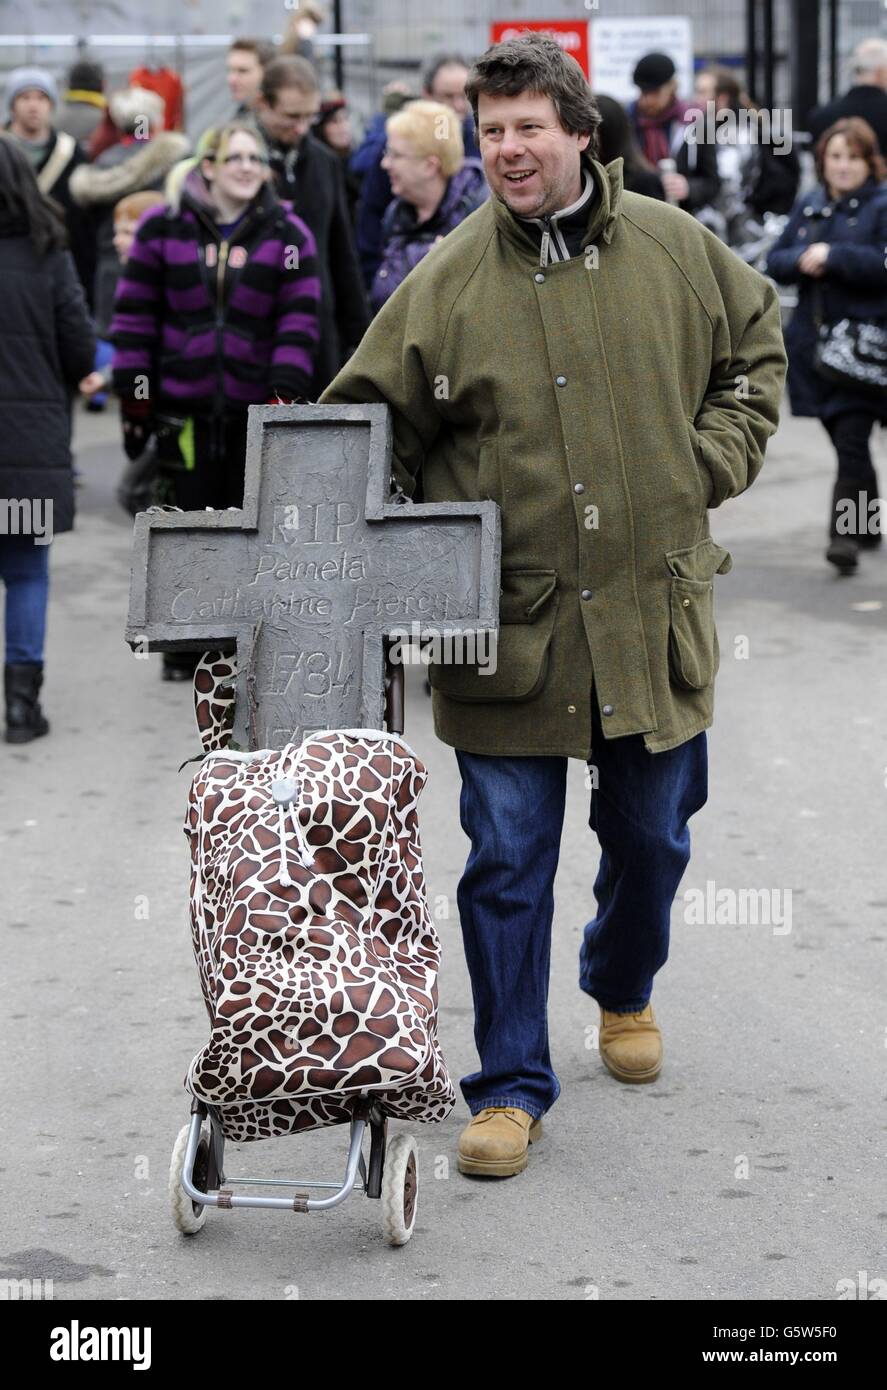 Robert Stewart from Waltham Abbey, Essex, leaves with items purchased at the London Dungeon 'Carnage Car Boot Stall' held at the Capital Car Boot Sale in Chichester Street, Pimlico, London. Stock Photo